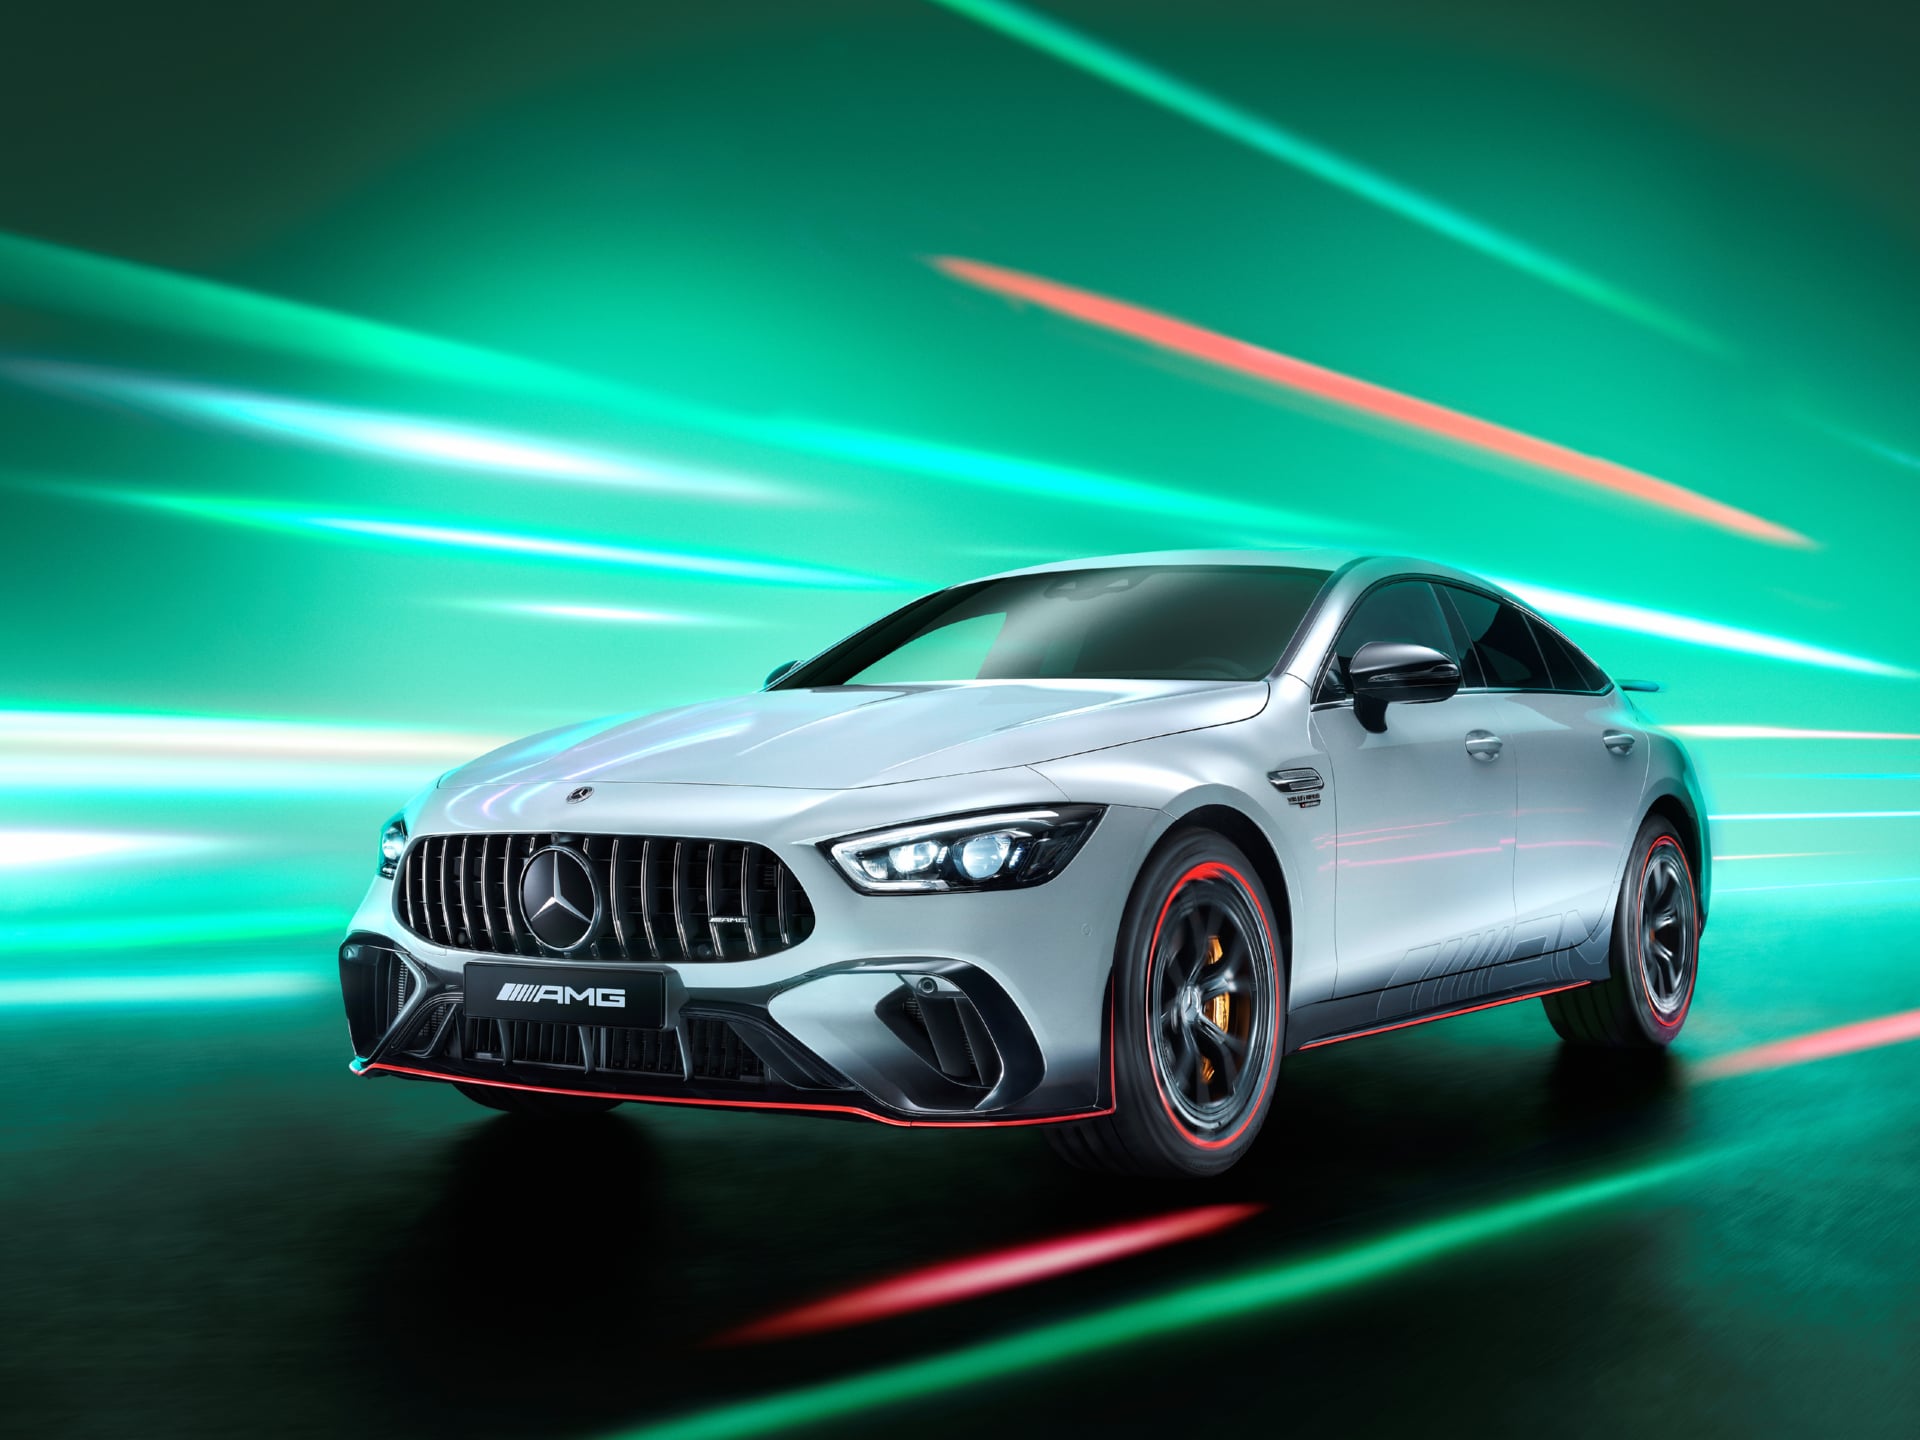 Mercedes-AMG GT 63 S E Performance 4-Door Coupe wallpapers HD quality